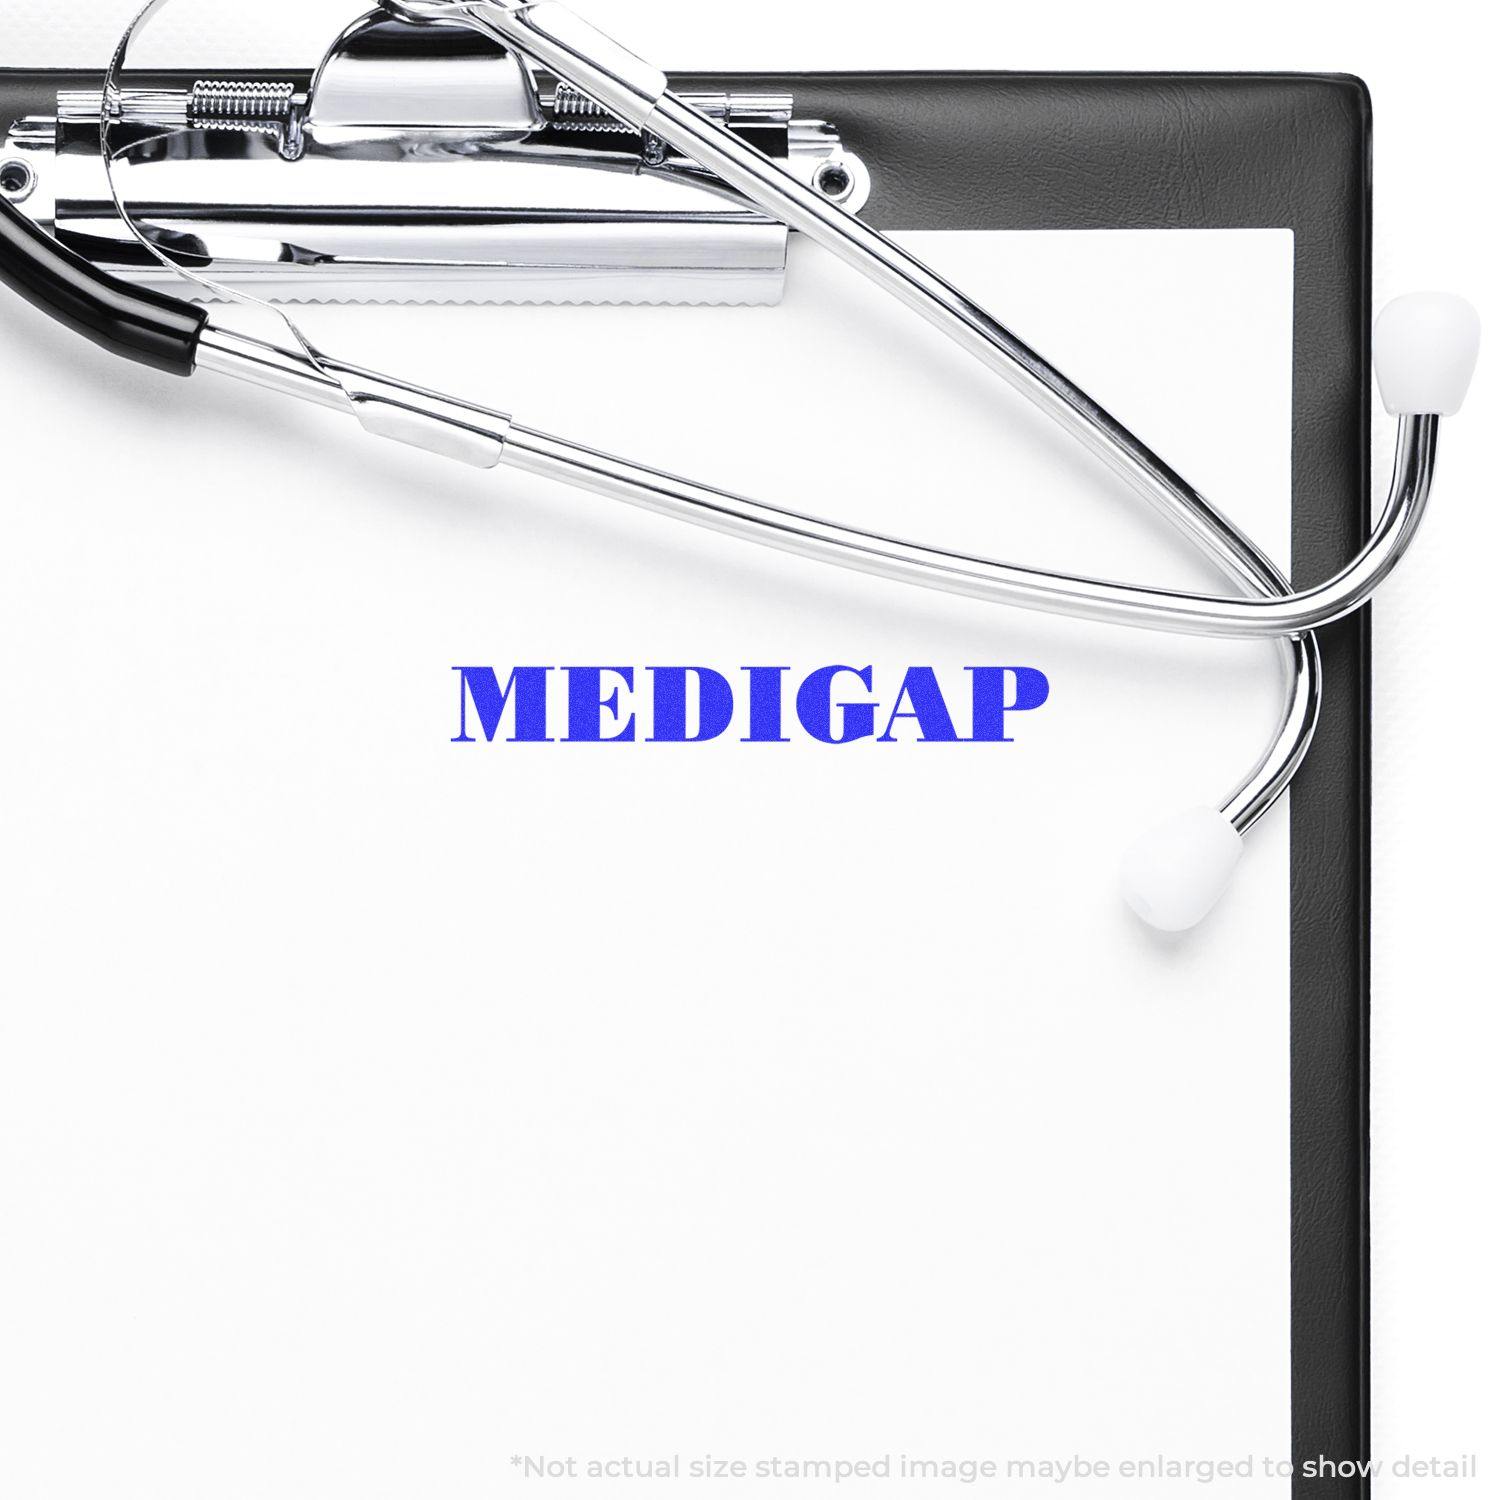 A stock office rubber stamp with a stamped image showing how the text "MEDIGAP" in a large font is displayed after stamping.